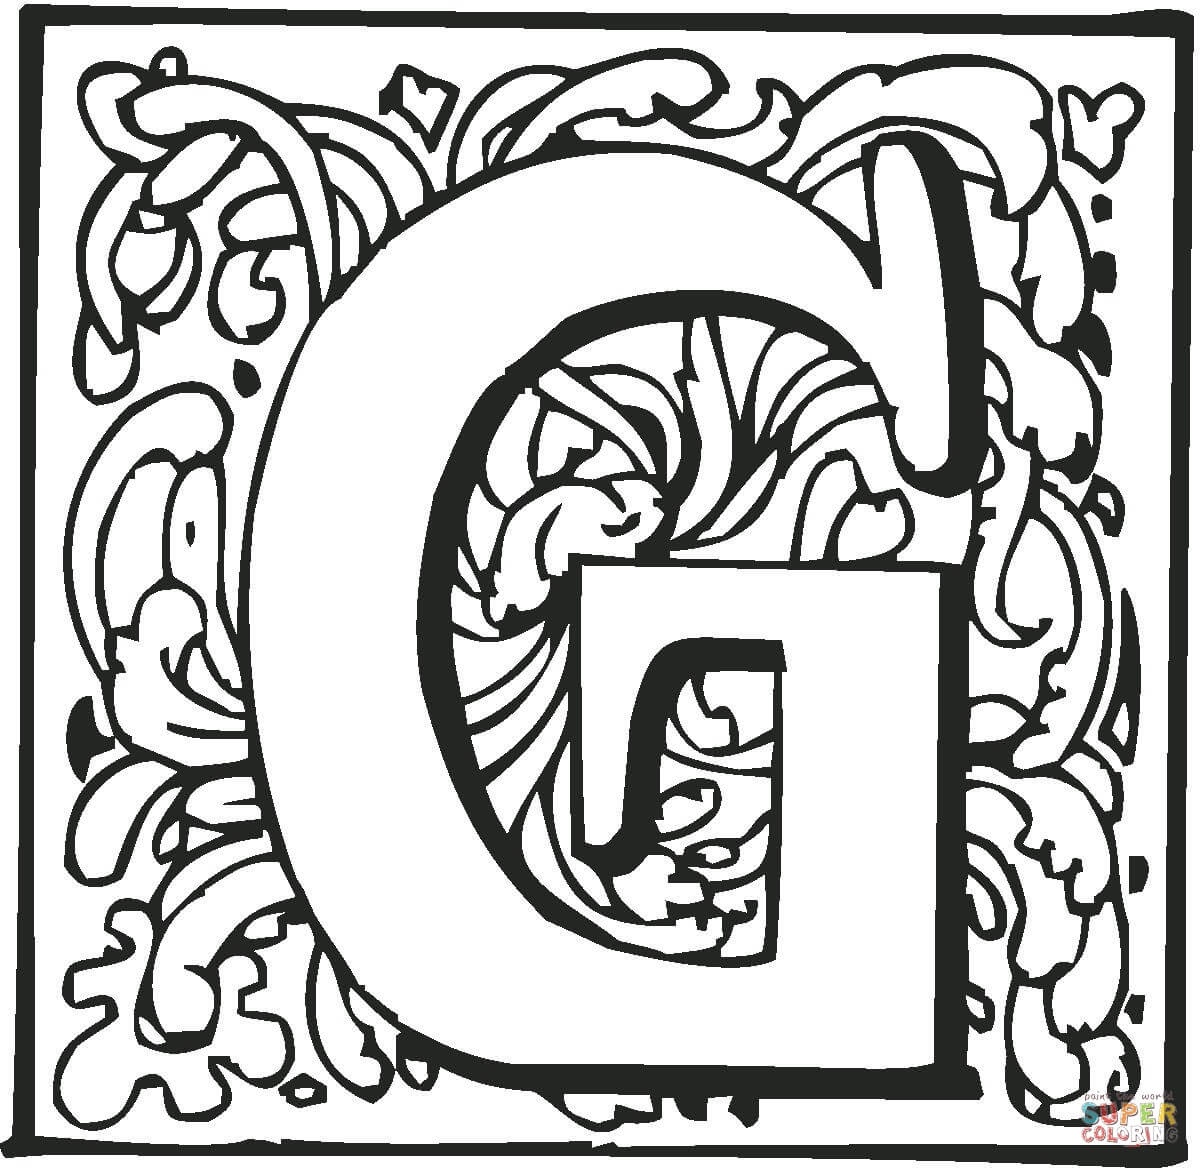 Letter G Coloring Pages | Free Coloring Pages - Free Printable Letter G Coloring Pages